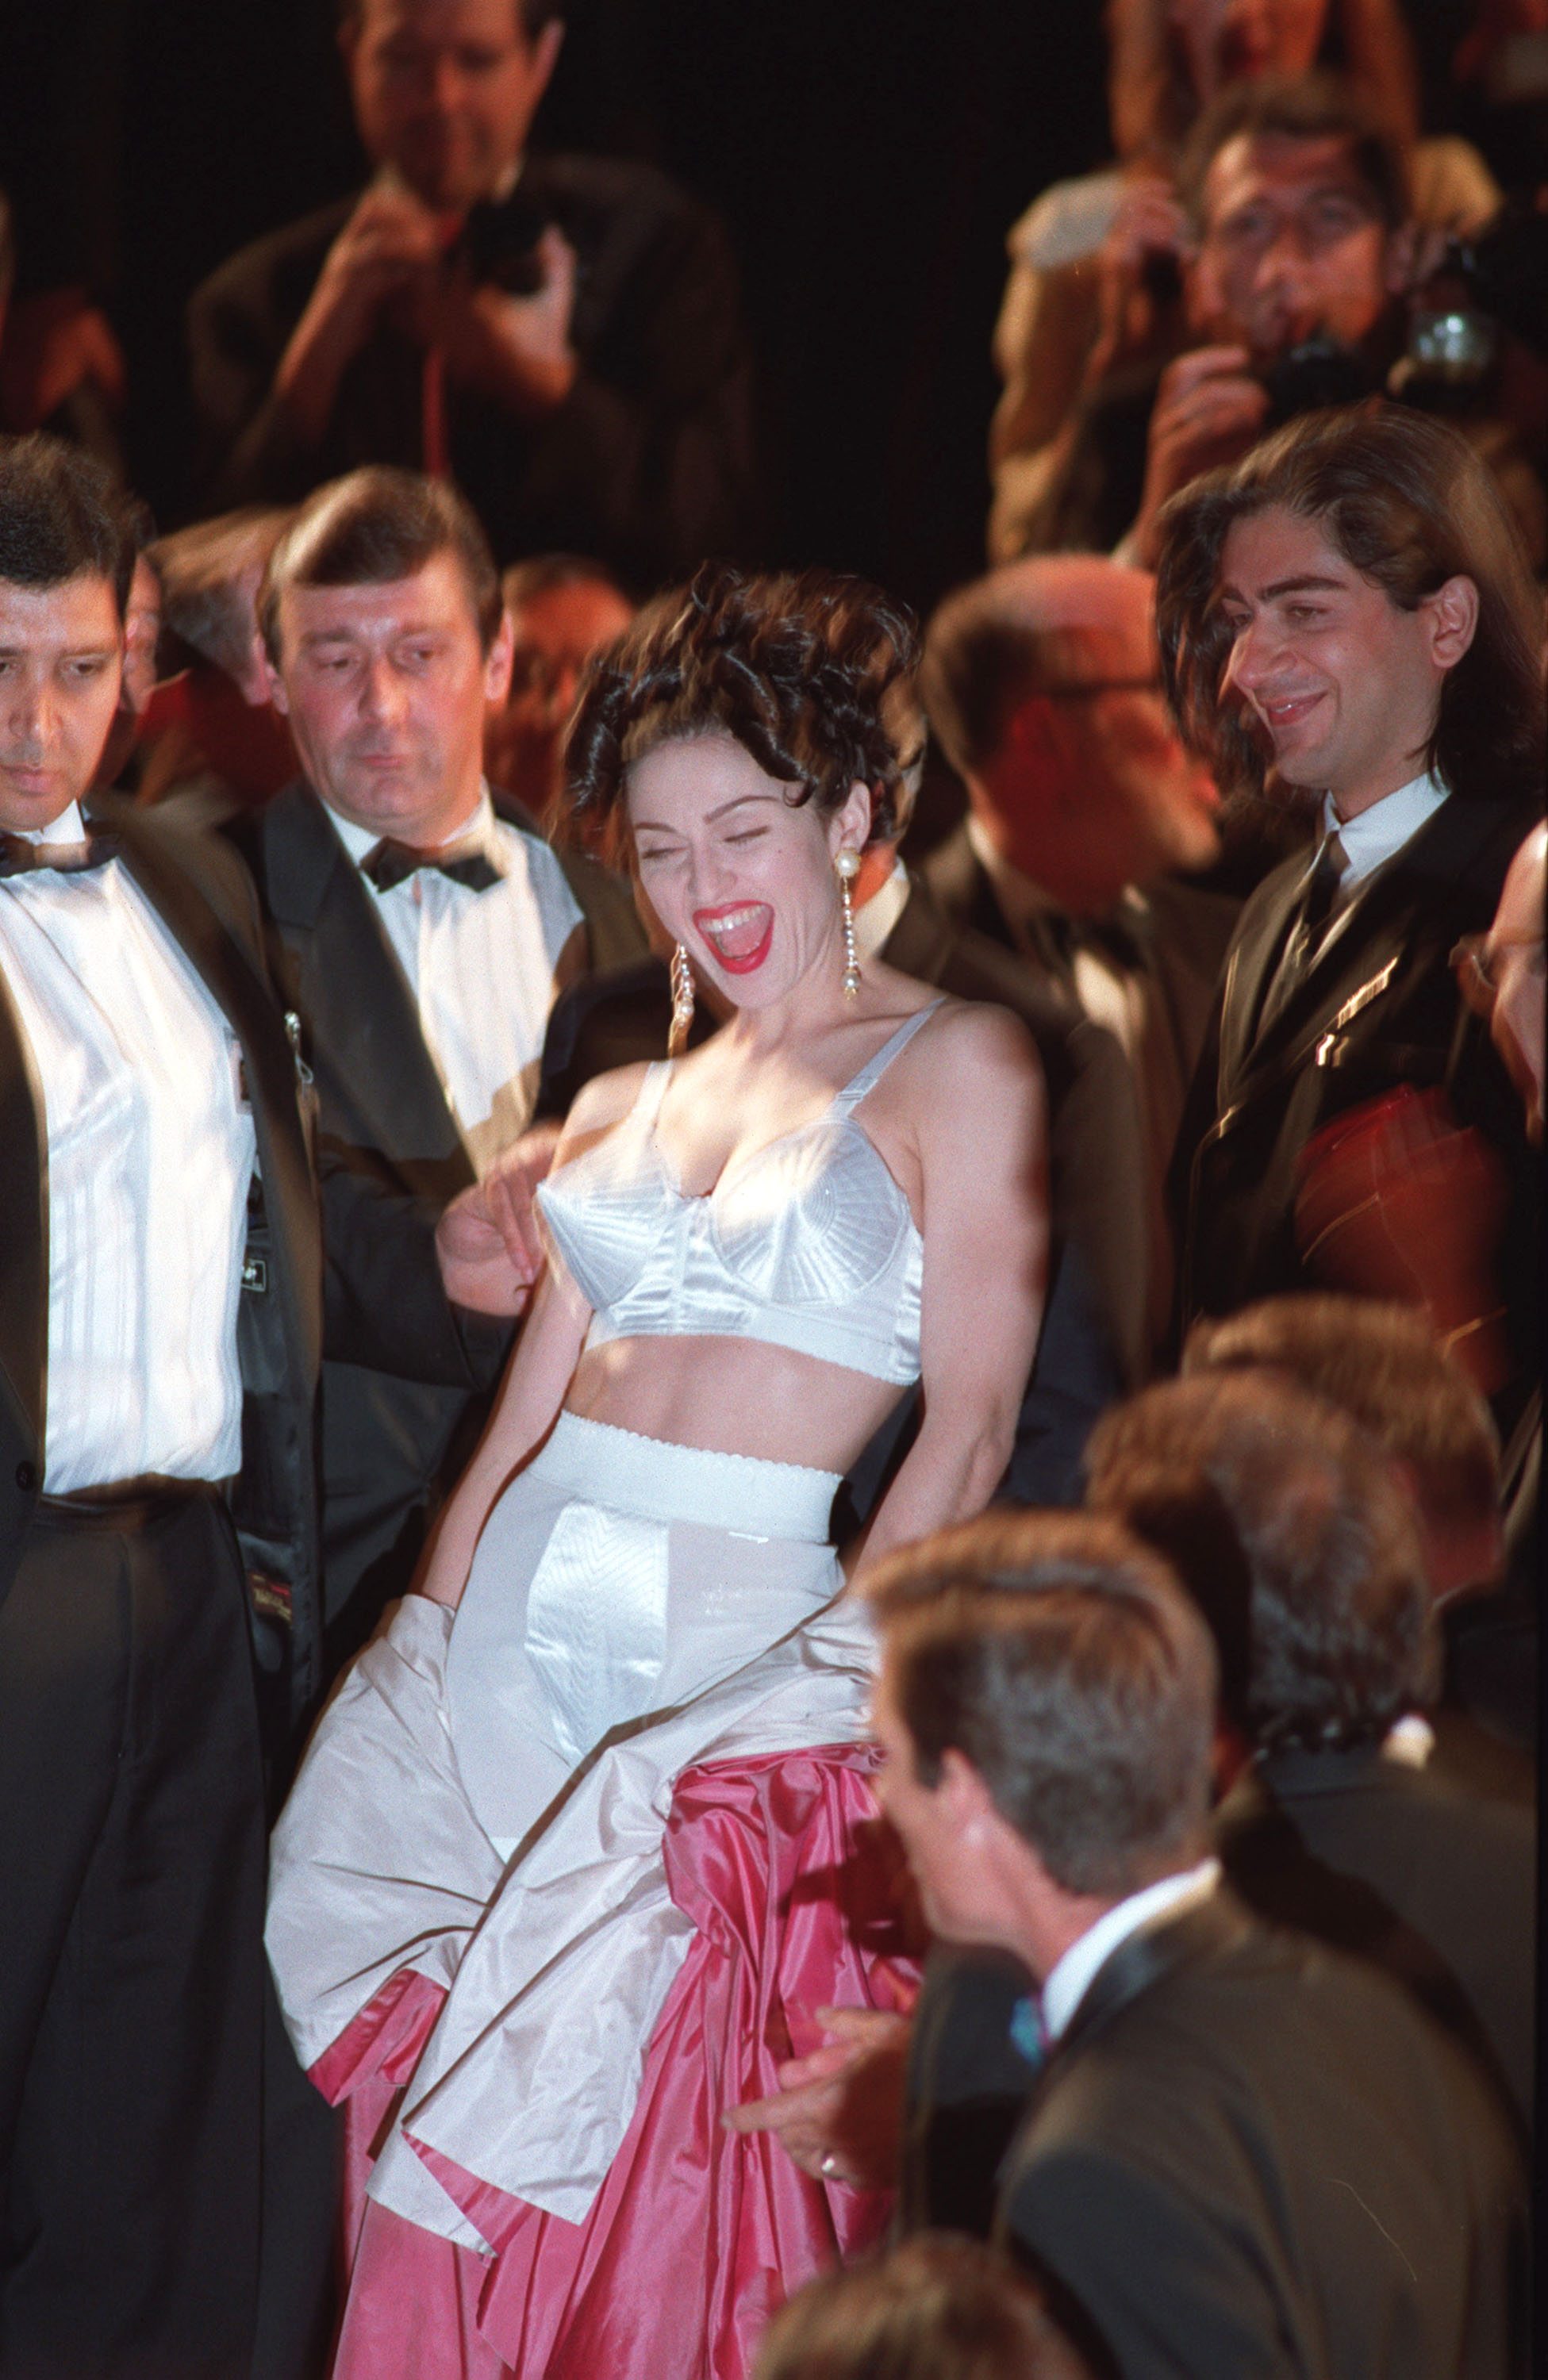 Madonna at the screening of In Bed with Madonna at the 1991 Cannes Film Festival in Cannes. Photo by Dave Hogan/Getty Images.